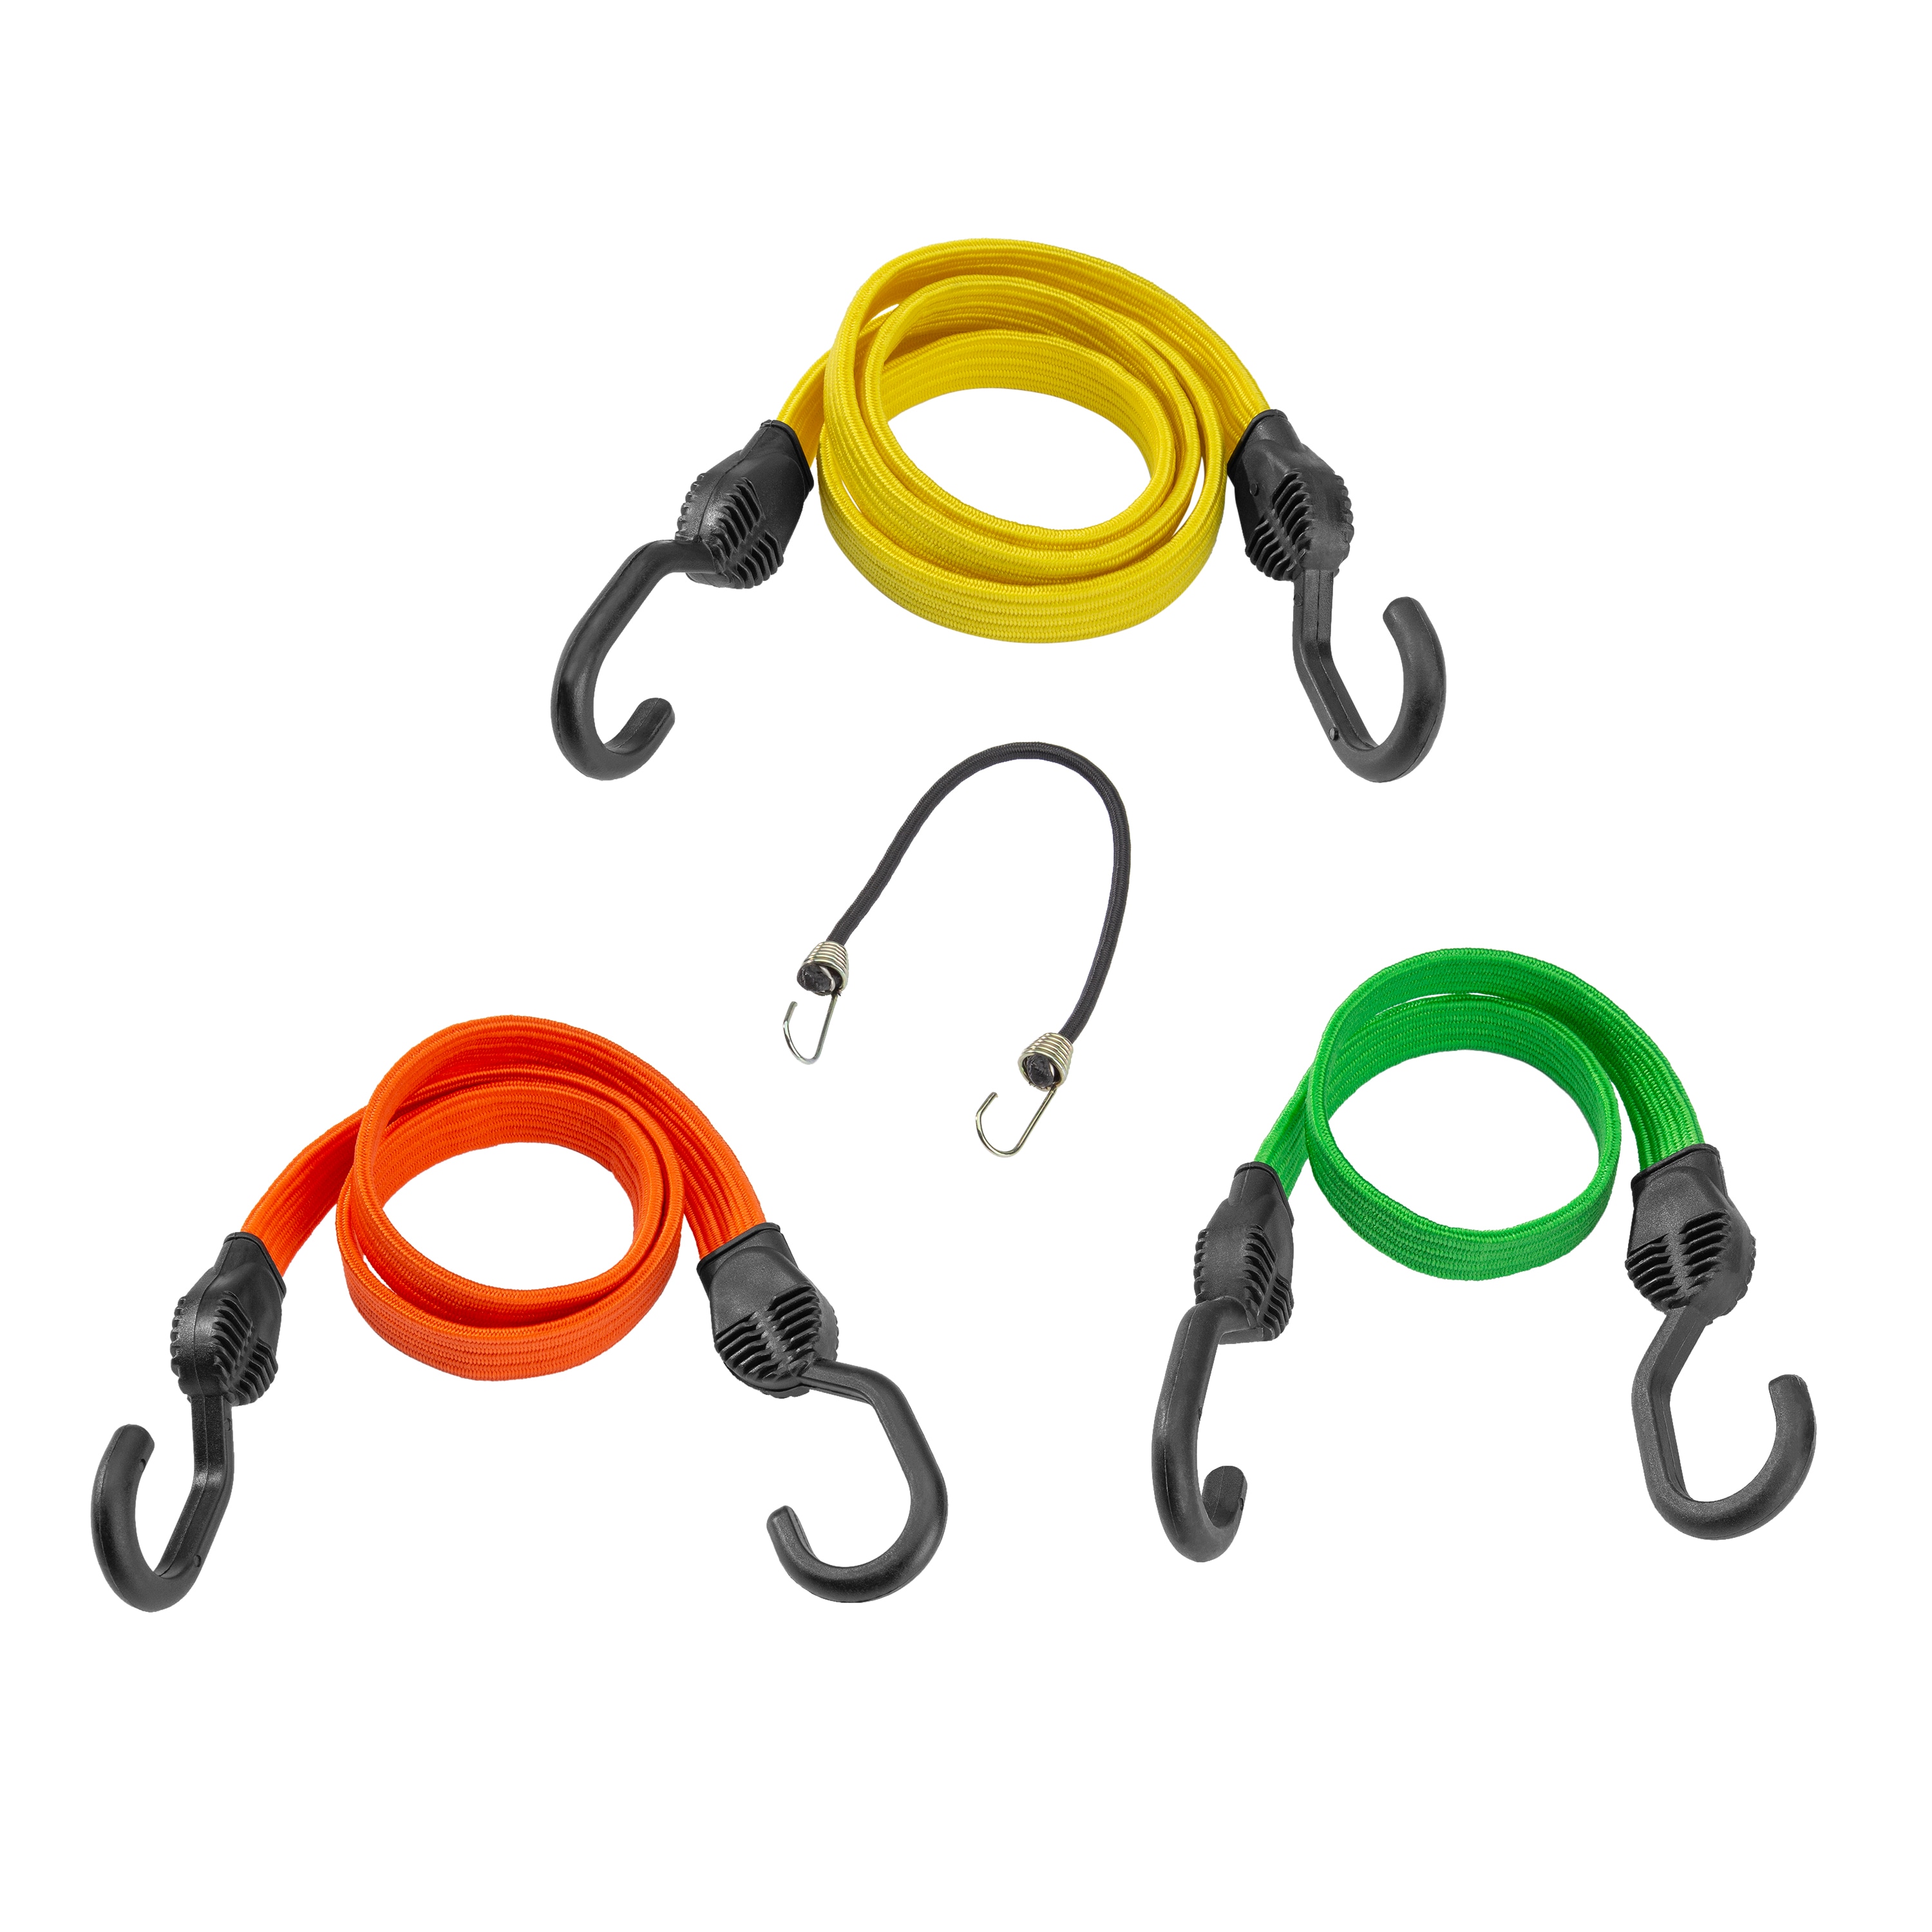 Cling 20pc Assorted Bungee Cords : Target